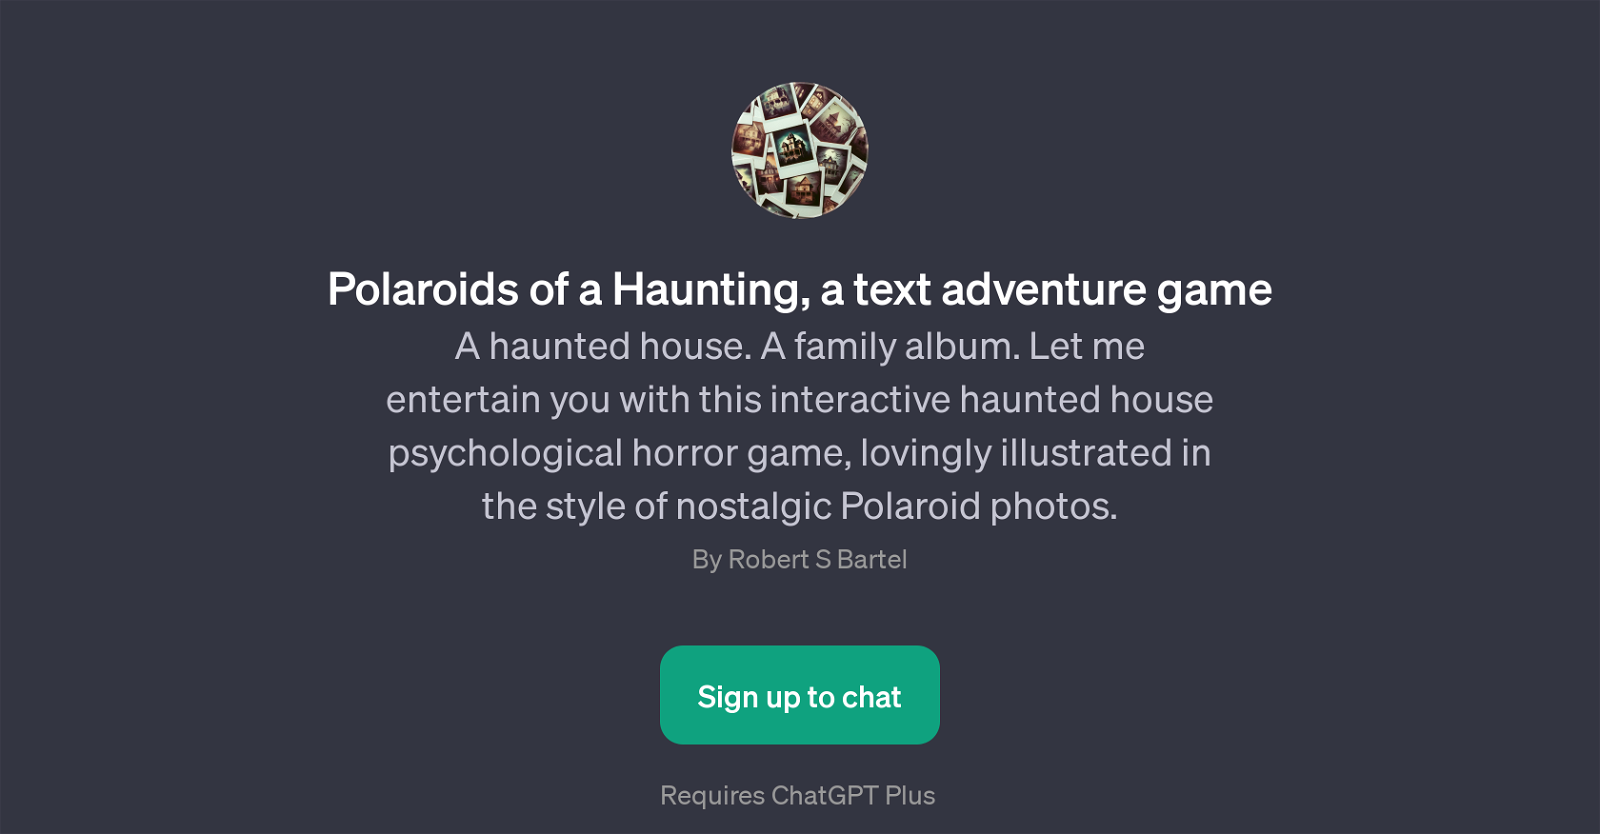 Polaroids of a Haunting website